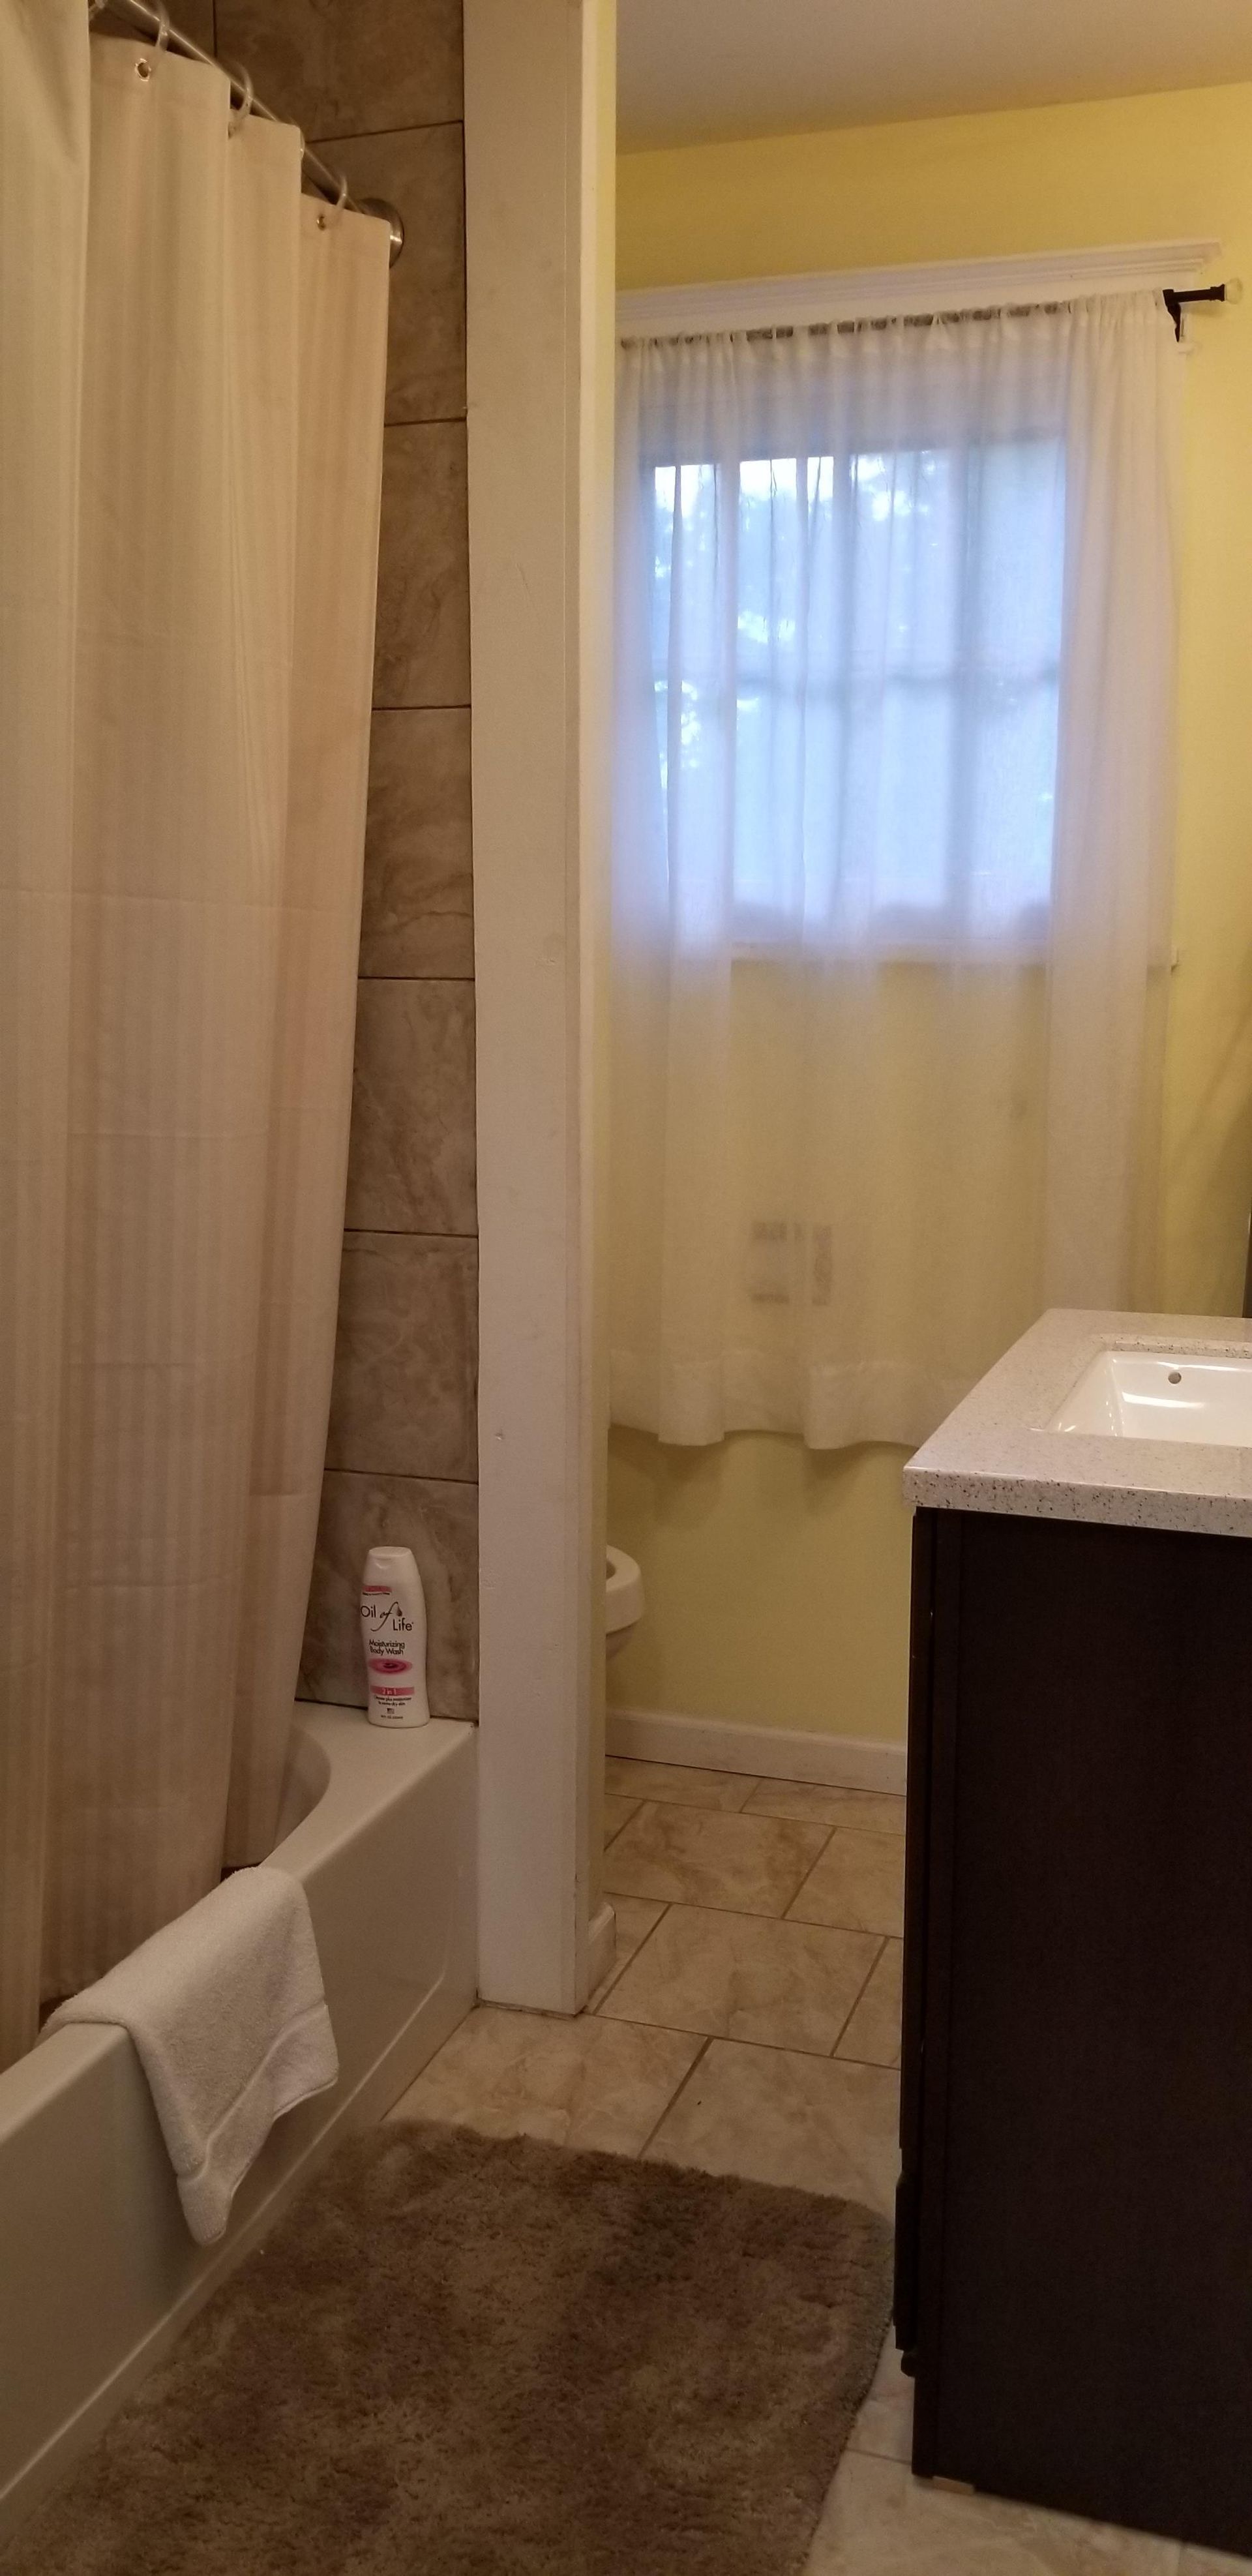 A bathroom with a tub , sink , window and shower curtain.